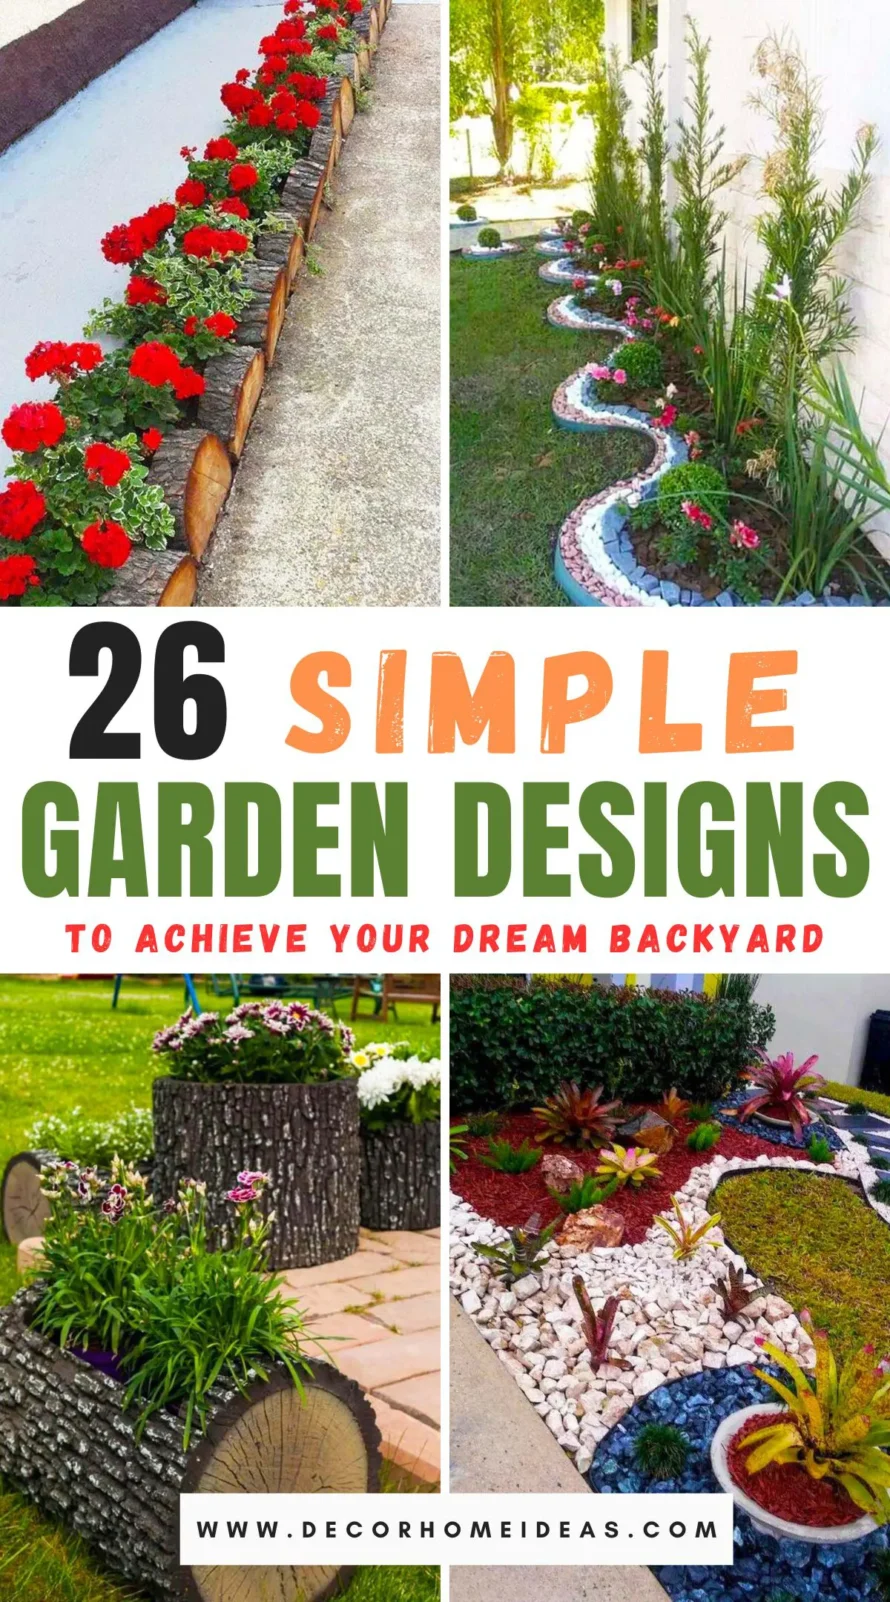 Explore 26 easy garden transformations that promise to perfect your outdoor space. From quick DIY projects to simple landscaping tweaks, these ideas are both practical and inspiring. Unlock your garden's potential today!